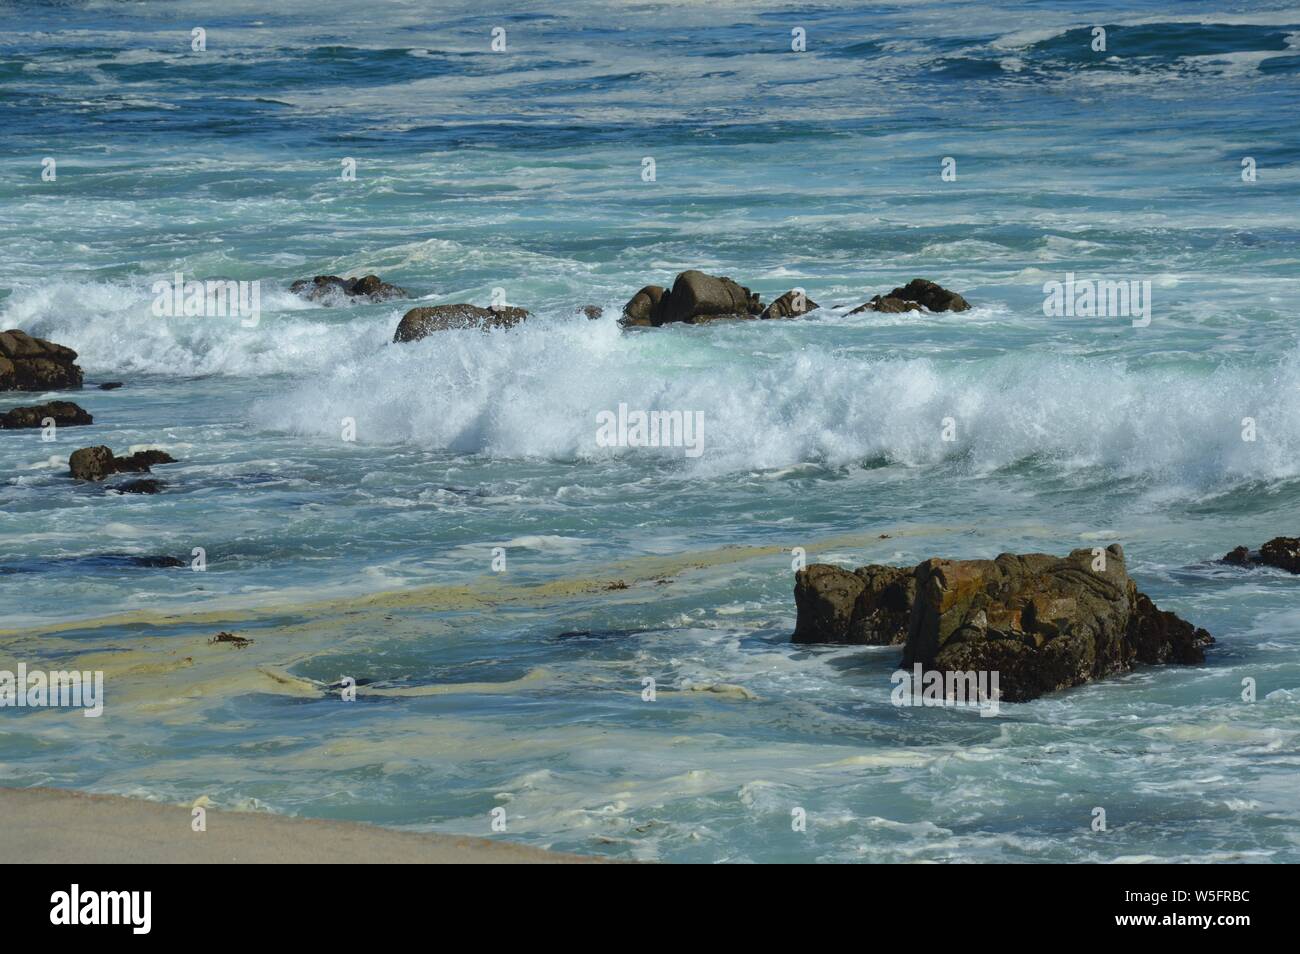 mighty waves dashing on thshore of the coast of Southern California Stock Photo